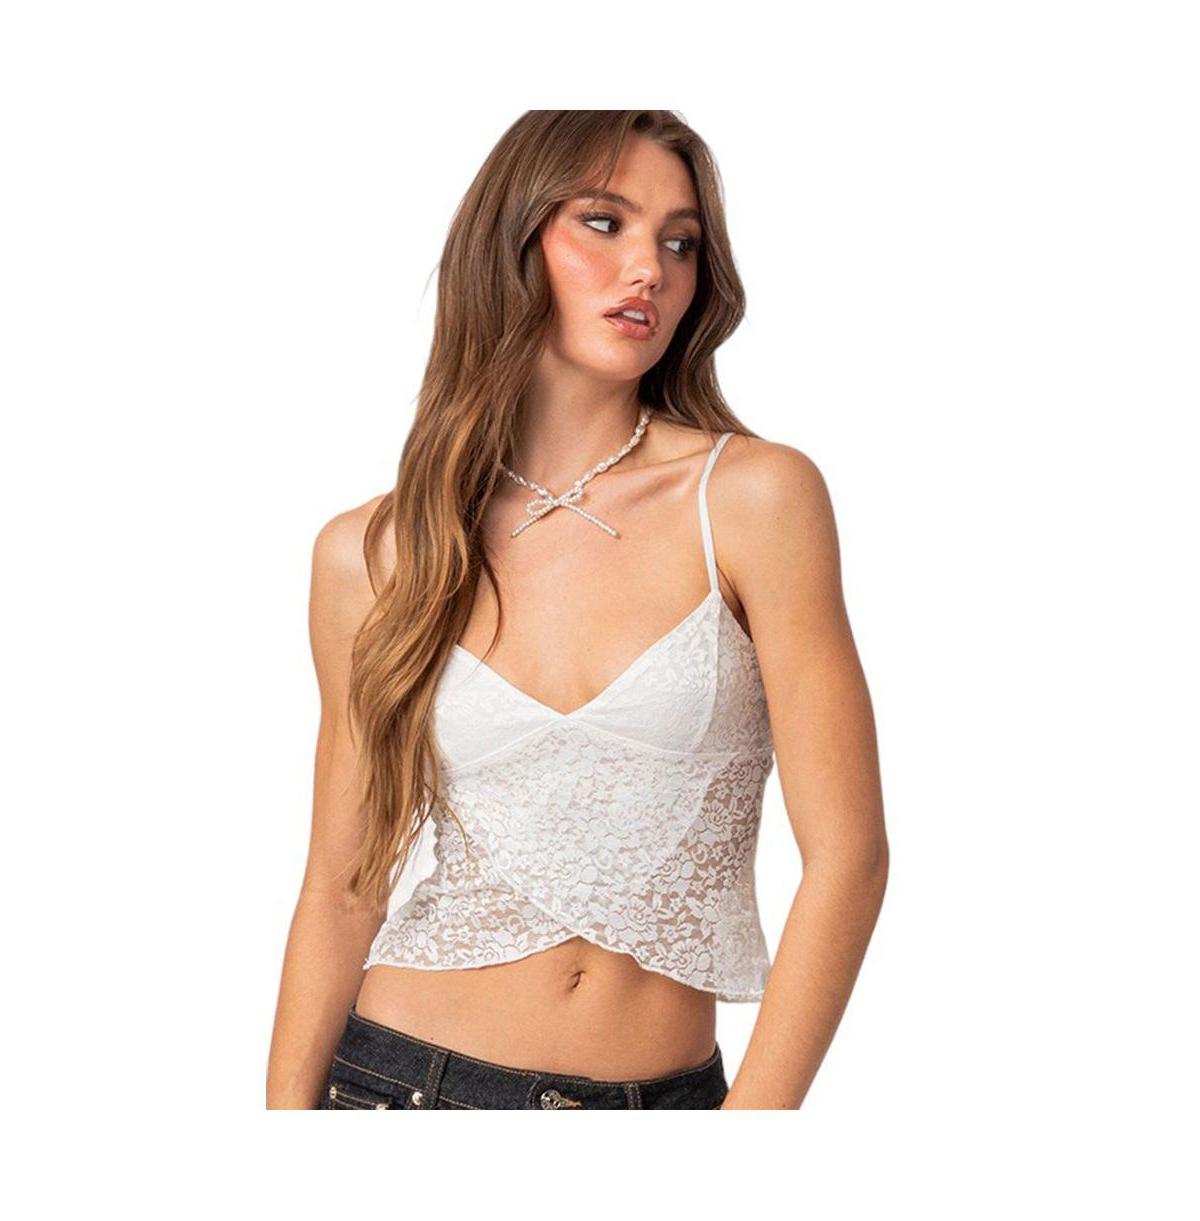 Edikted Crossover Sheer Lace Tank Top in White